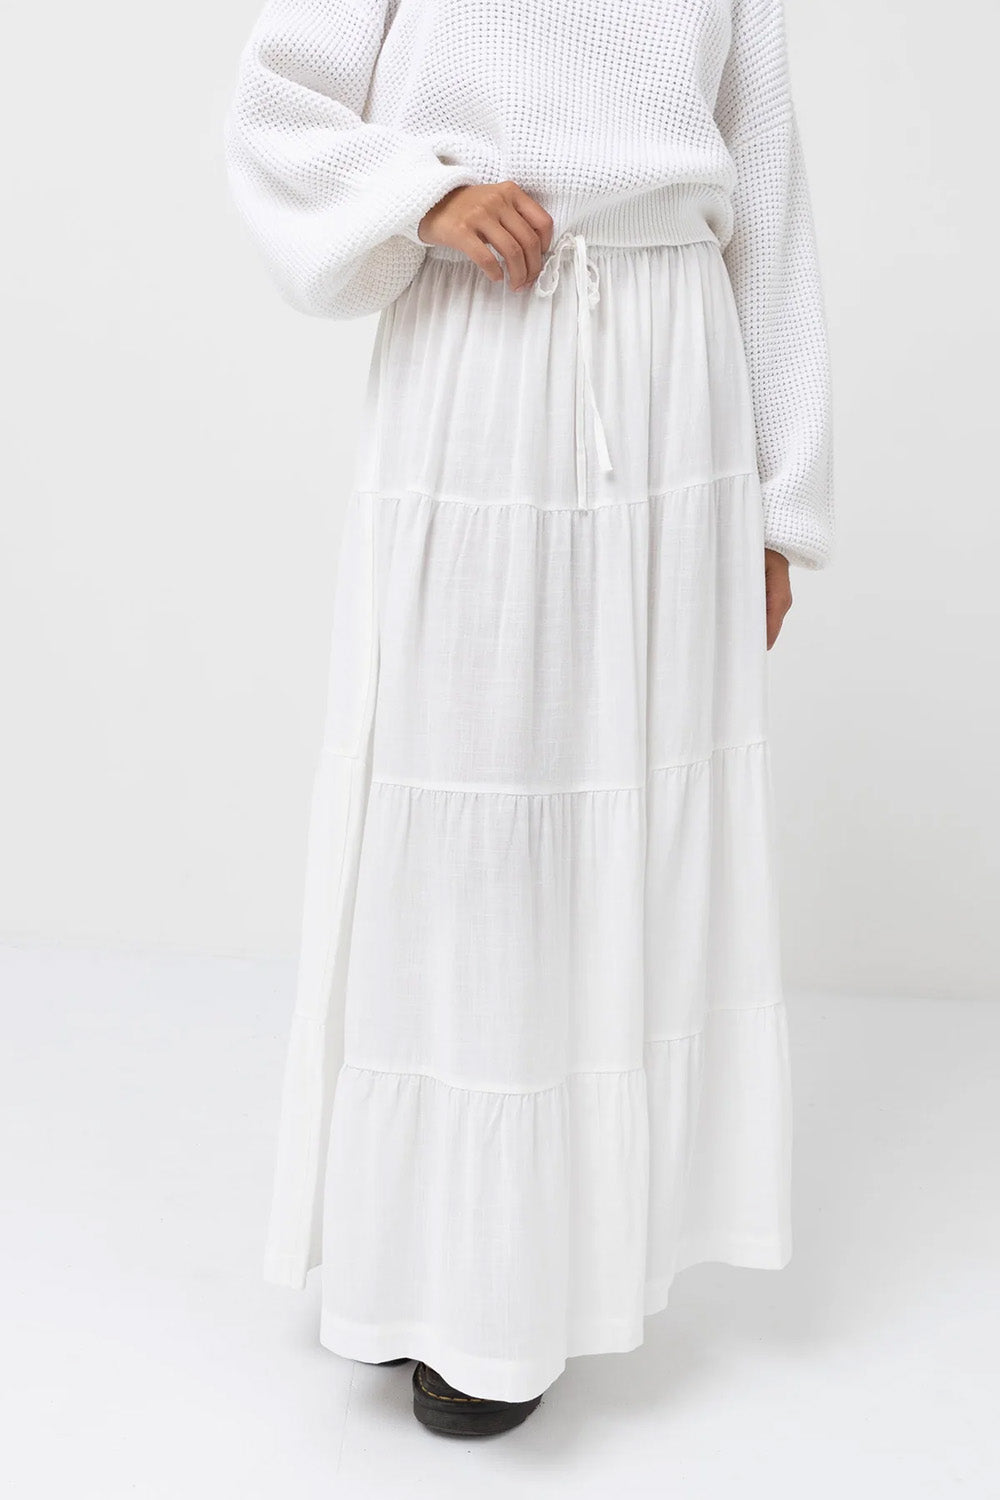 Rhythm - Classic Tiered Maxi Skirt - White - Front